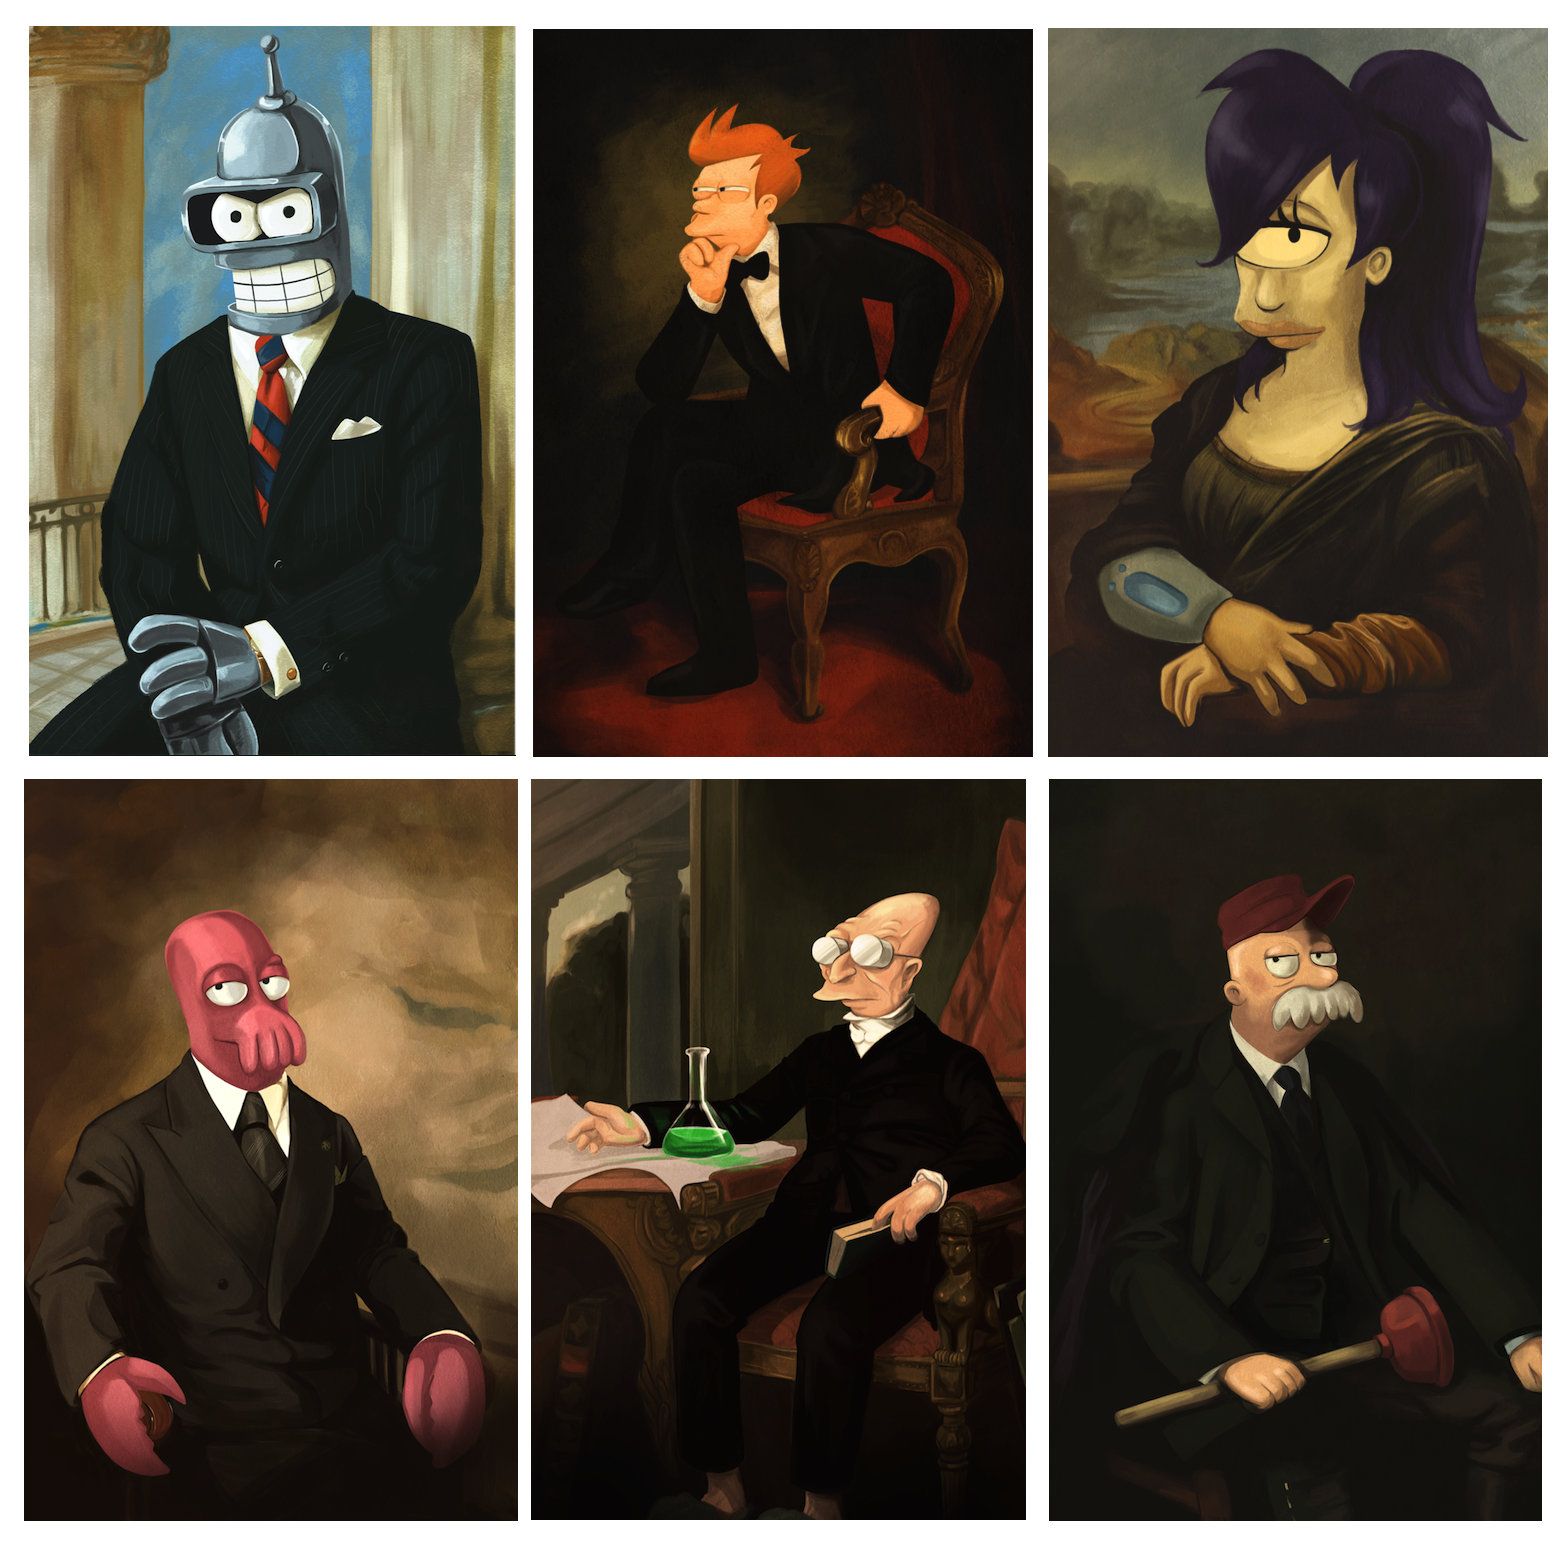 thought you all would enjoy seeing my Futurama artwork featuring the characters as famous portraits